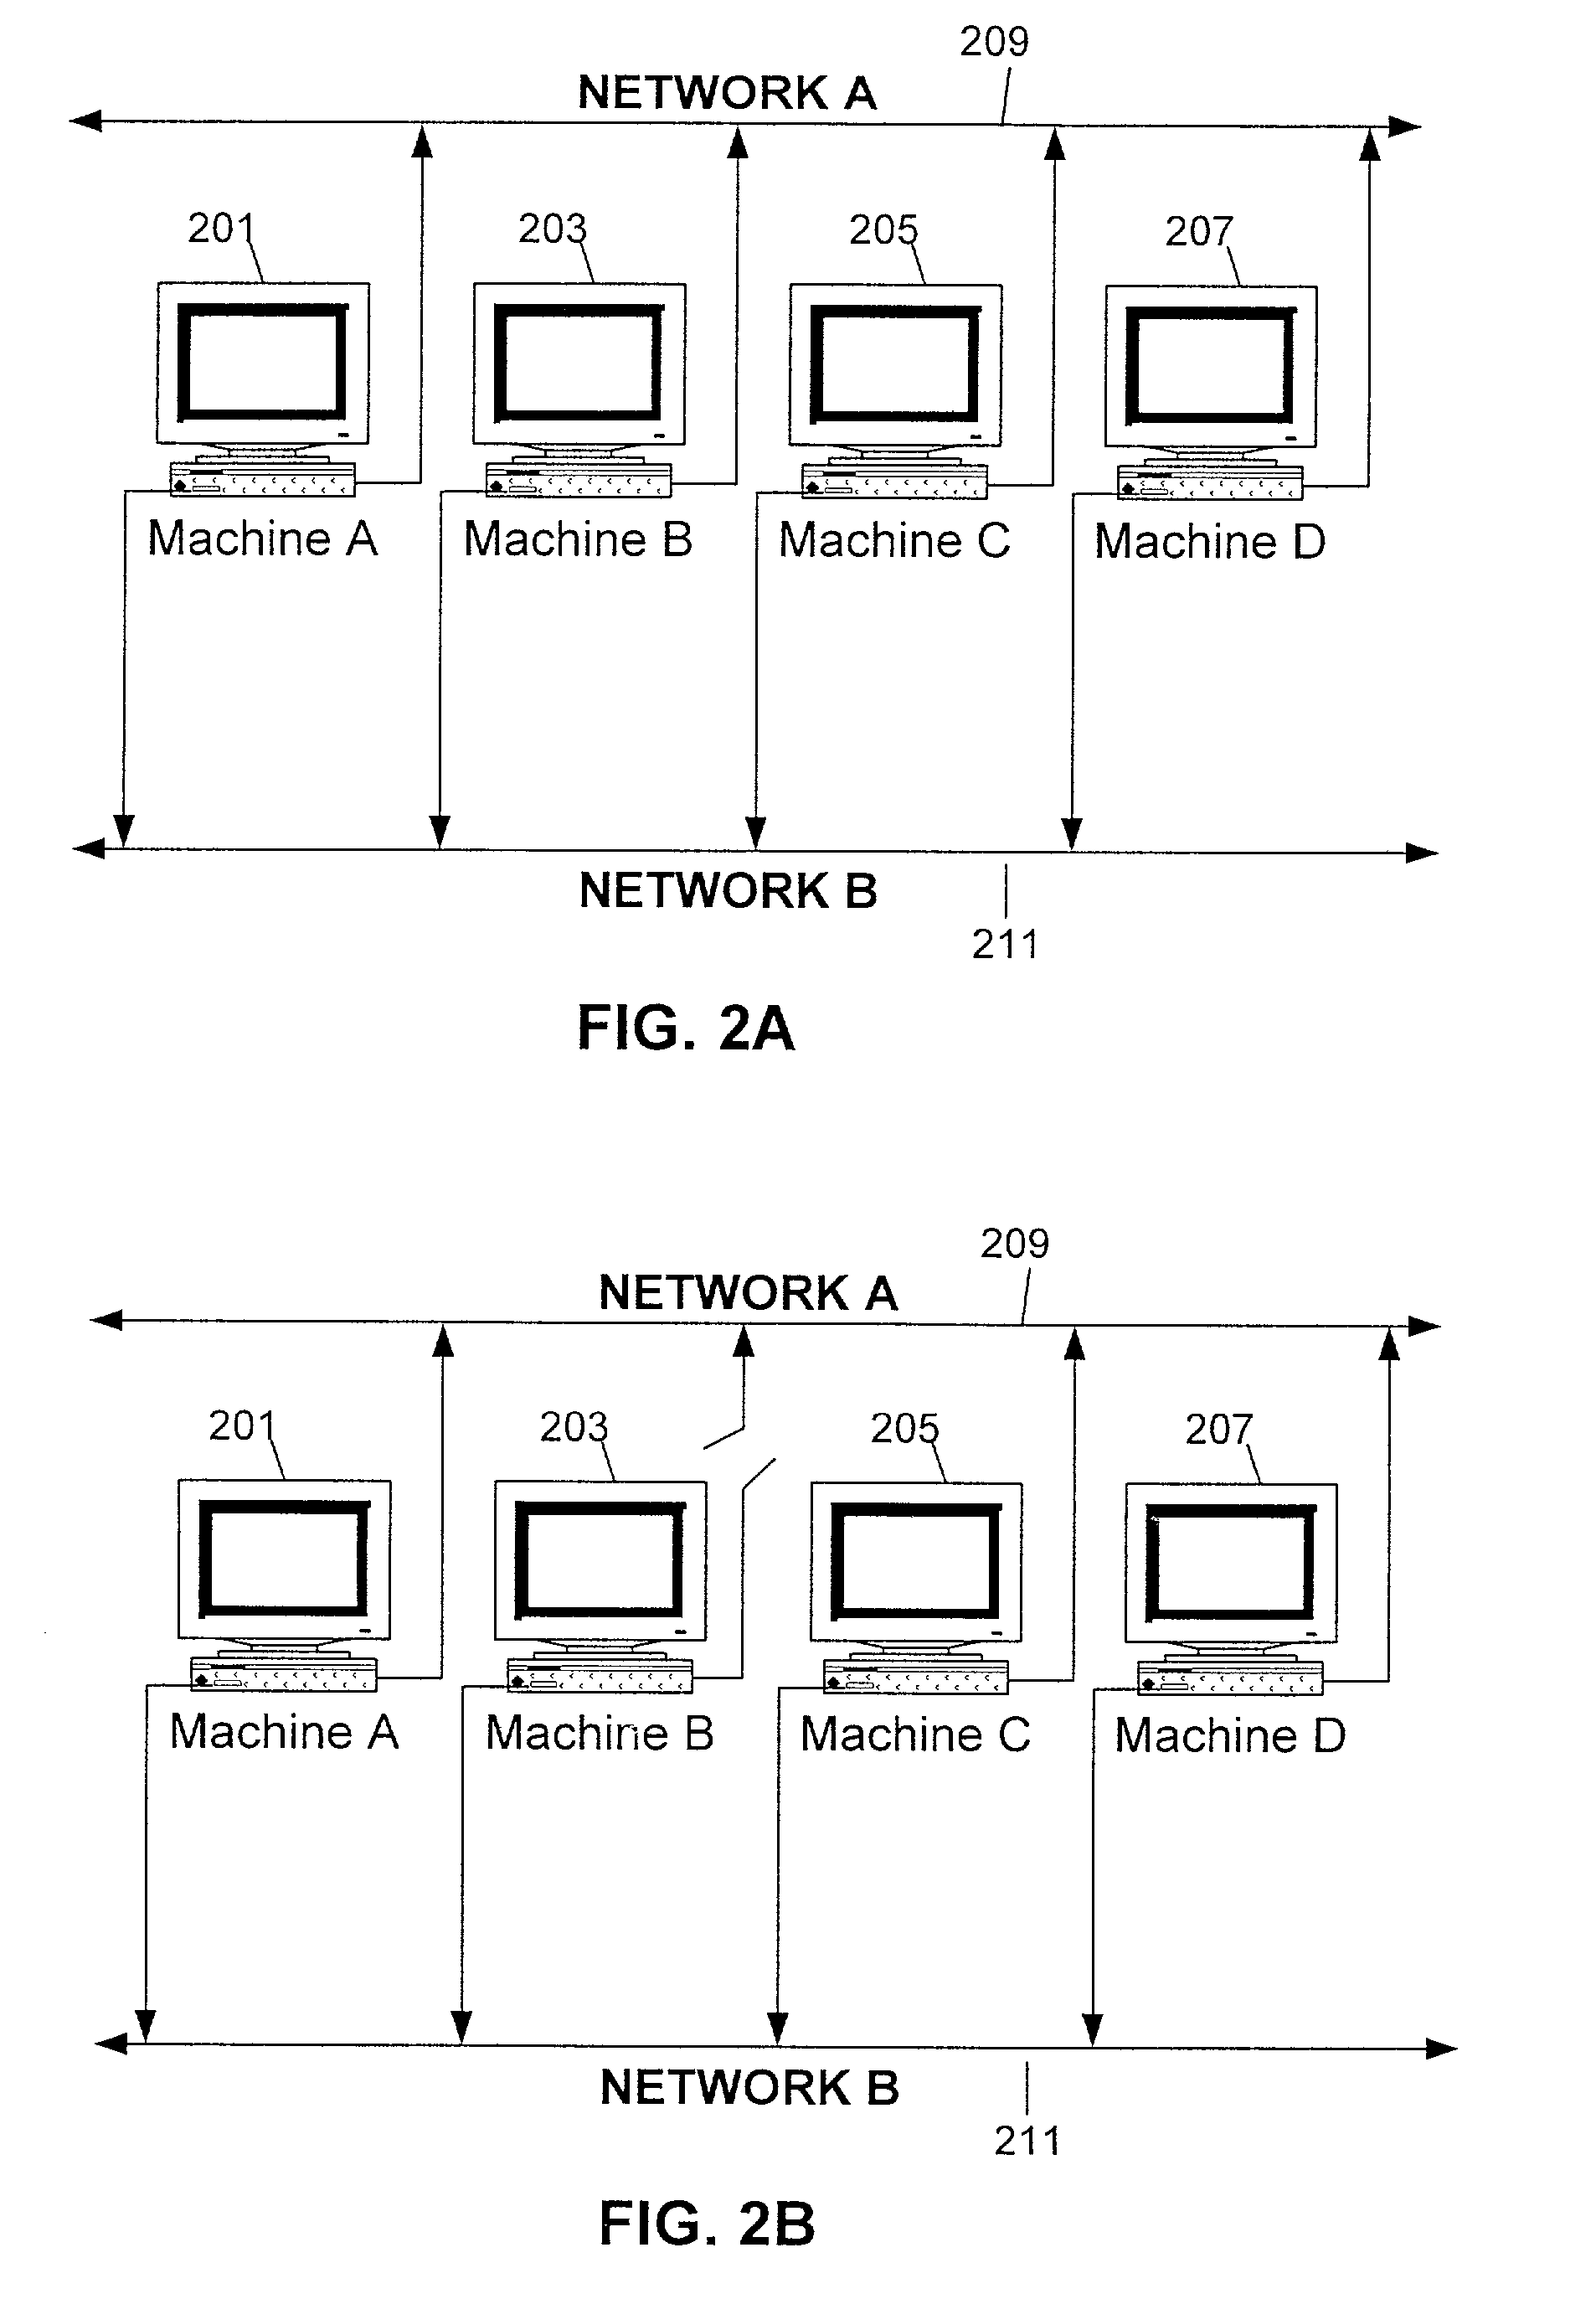 Method and apparatus for network fault correction via adaptive fault router